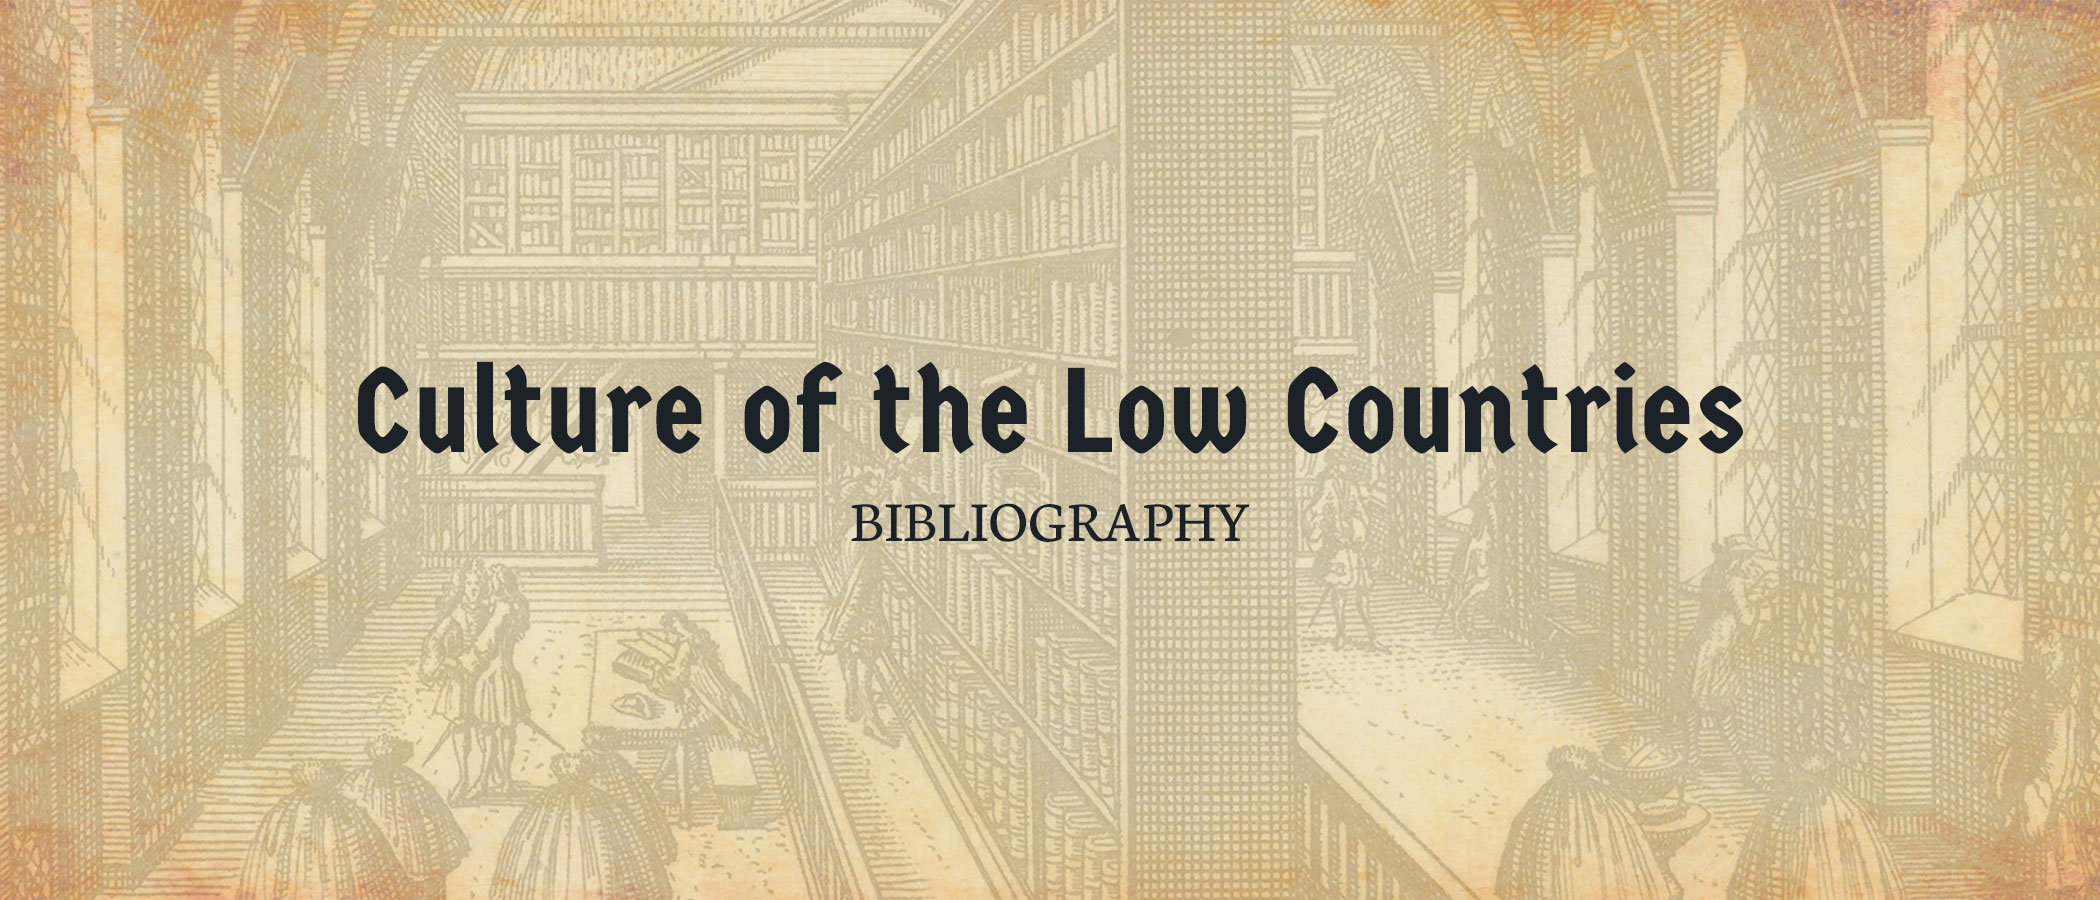 Bibliography 02: Culture of the Low Countries